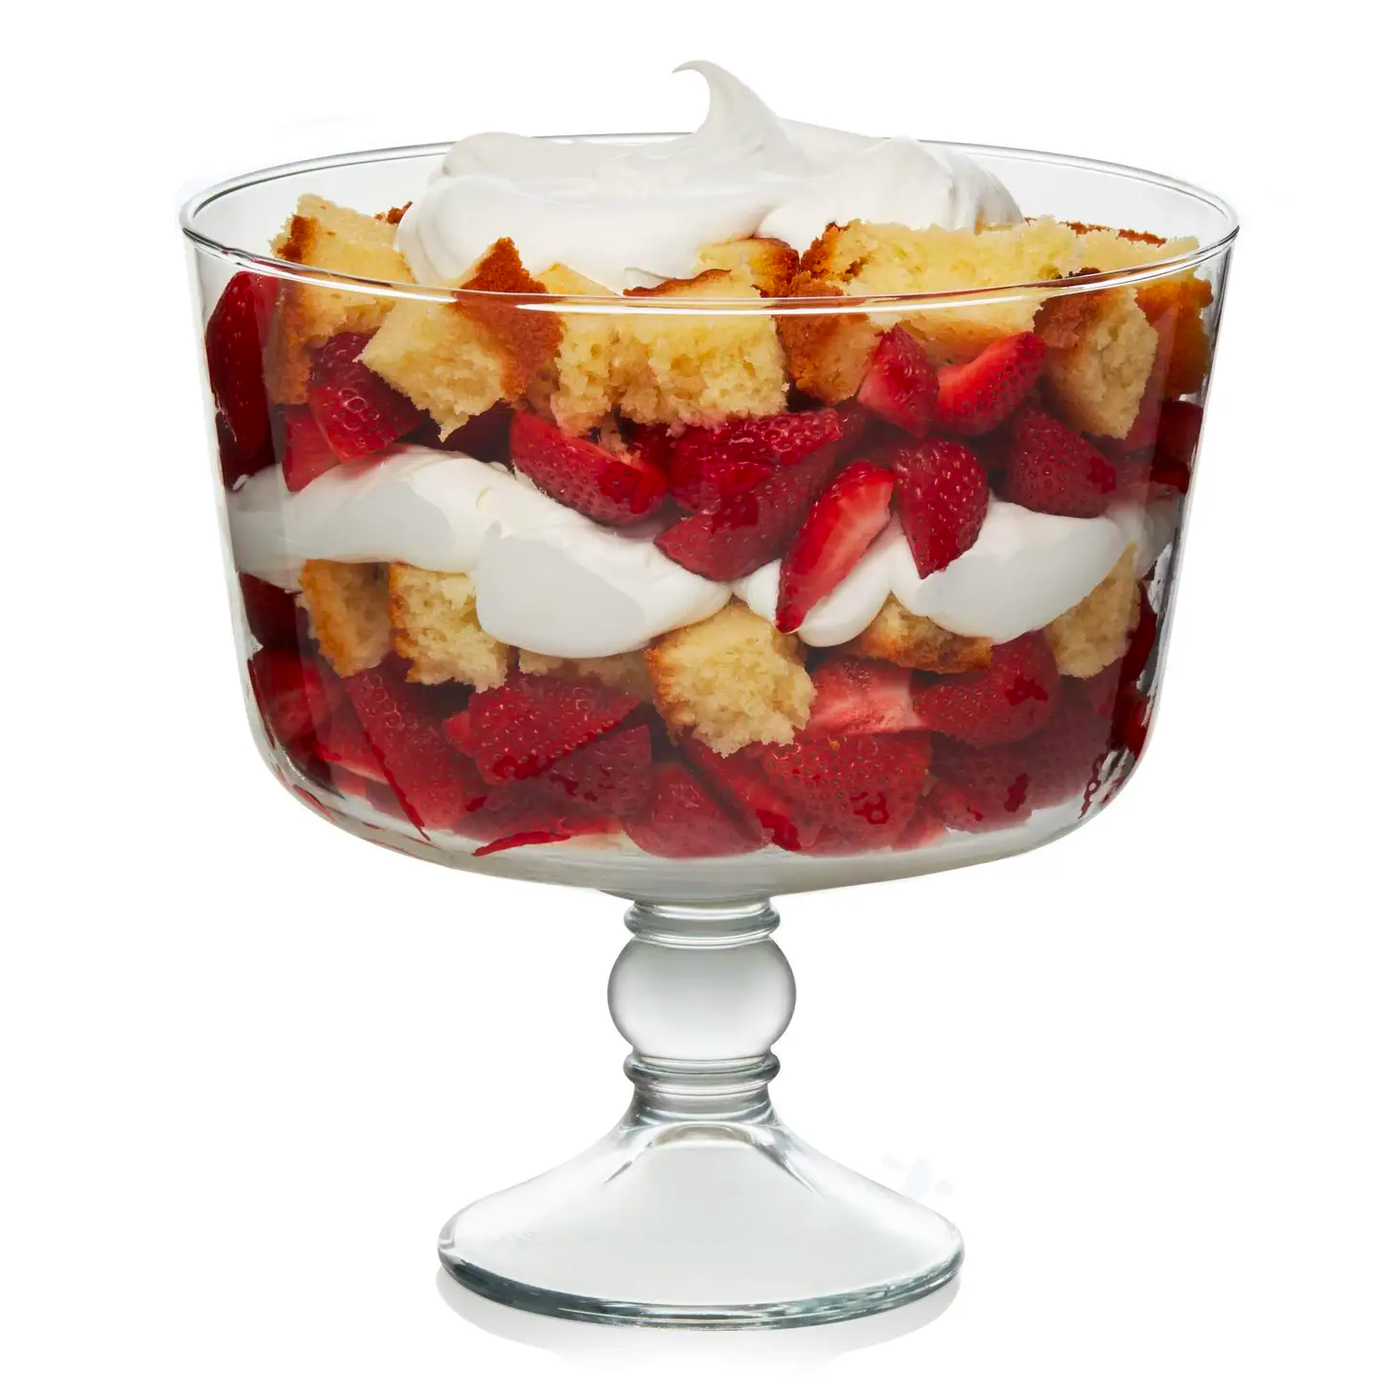 Libbey Selene Footed Glass Trifle Bowl, 9-inch (1 Count) - Set With Style